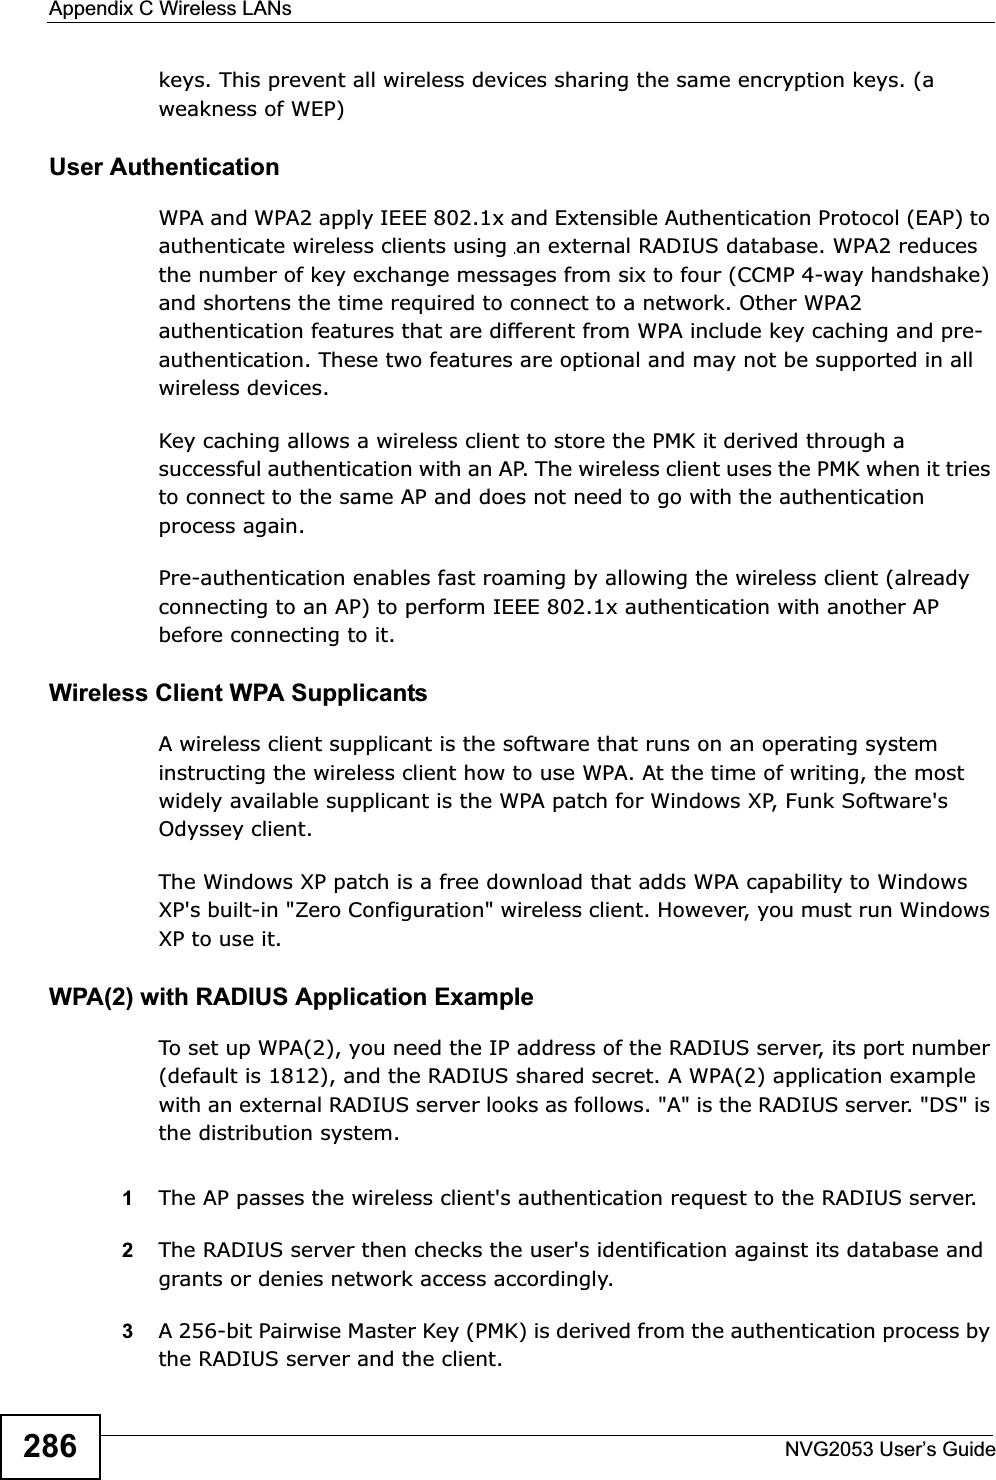 Appendix C Wireless LANsNVG2053 User’s Guide286keys. This prevent all wireless devices sharing the same encryption keys. (a weakness of WEP)User Authentication WPA and WPA2 apply IEEE 802.1x and Extensible Authentication Protocol (EAP) to authenticate wireless clients using an external RADIUS database. WPA2 reduces the number of key exchange messages from six to four (CCMP 4-way handshake) and shortens the time required to connect to a network. Other WPA2 authentication features that are different from WPA include key caching and pre-authentication. These two features are optional and may not be supported in all wireless devices.Key caching allows a wireless client to store the PMK it derived through a successful authentication with an AP. The wireless client uses the PMK when it tries to connect to the same AP and does not need to go with the authentication process again.Pre-authentication enables fast roaming by allowing the wireless client (already connecting to an AP) to perform IEEE 802.1x authentication with another AP before connecting to it.Wireless Client WPA SupplicantsA wireless client supplicant is the software that runs on an operating system instructing the wireless client how to use WPA. At the time of writing, the most widely available supplicant is the WPA patch for Windows XP, Funk Software&apos;s Odyssey client. The Windows XP patch is a free download that adds WPA capability to Windows XP&apos;s built-in &quot;Zero Configuration&quot; wireless client. However, you must run Windows XP to use it. WPA(2) with RADIUS Application ExampleTo set up WPA(2), you need the IP address of the RADIUS server, its port number (default is 1812), and the RADIUS shared secret. A WPA(2) application example with an external RADIUS server looks as follows. &quot;A&quot; is the RADIUS server. &quot;DS&quot; is the distribution system.1The AP passes the wireless client&apos;s authentication request to the RADIUS server.2The RADIUS server then checks the user&apos;s identification against its database and grants or denies network access accordingly.3A 256-bit Pairwise Master Key (PMK) is derived from the authentication process by the RADIUS server and the client.